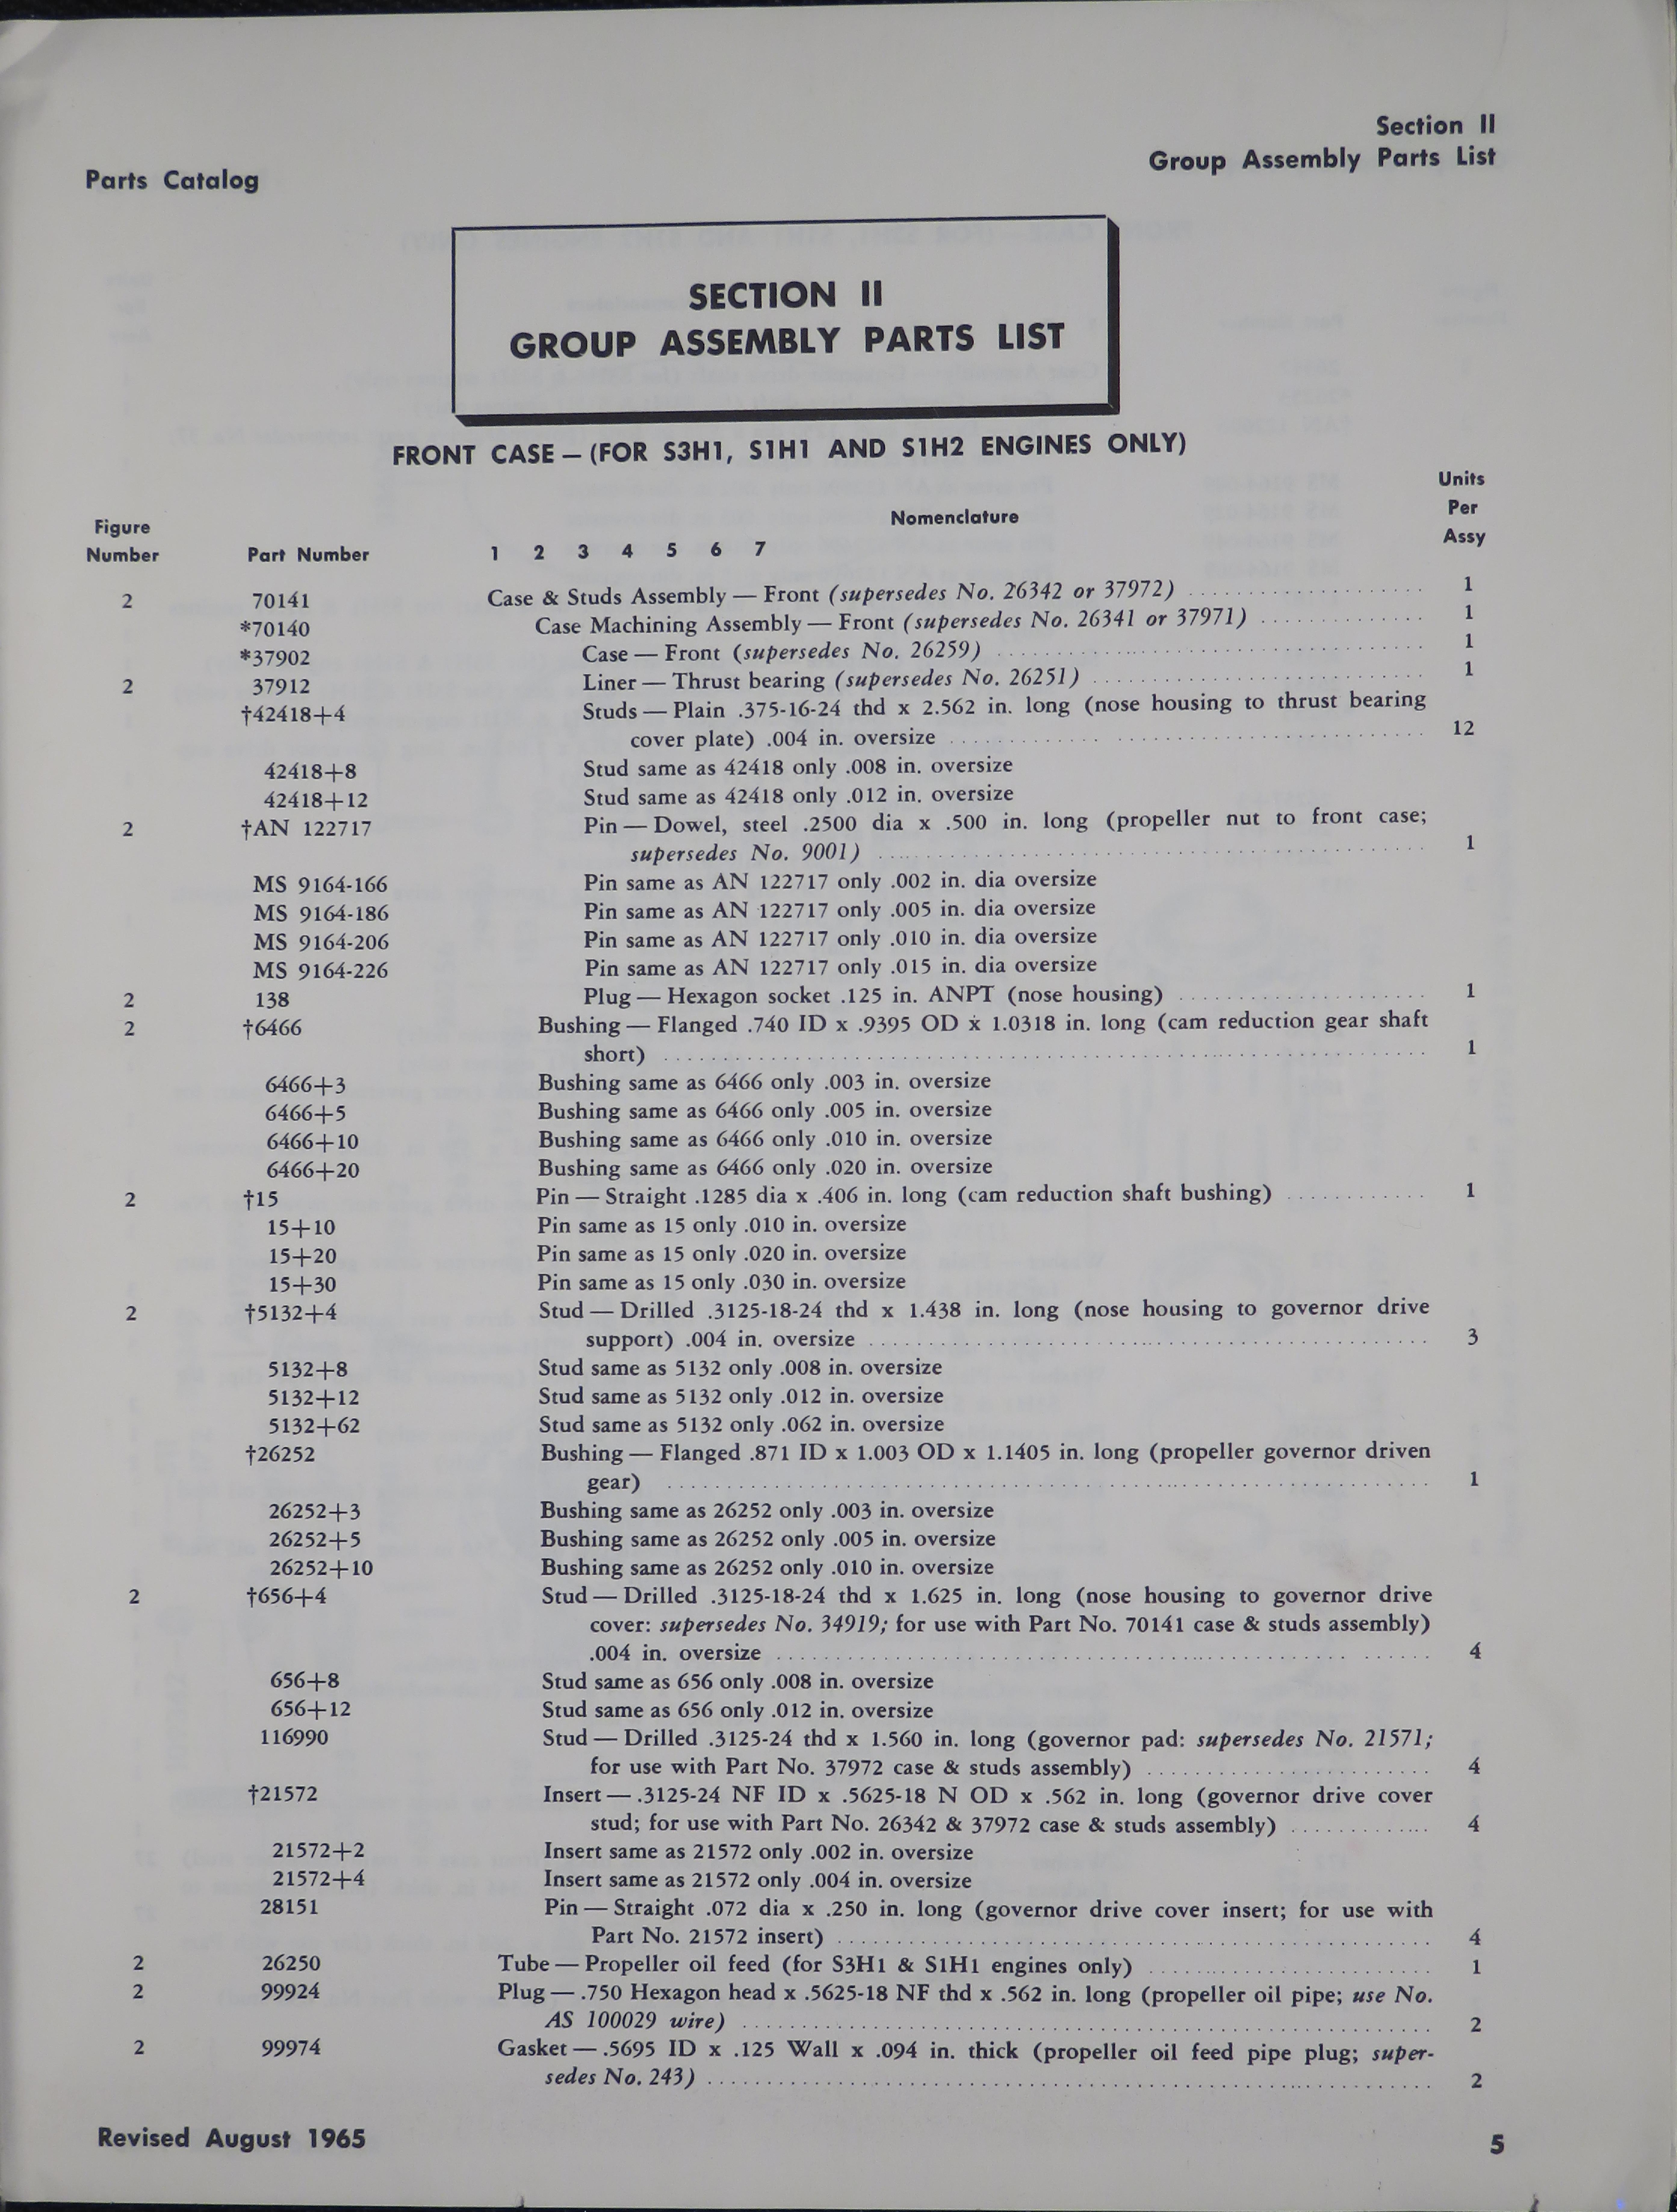 Sample page 11 from AirCorps Library document: Illustrated Parts Catalog for R-1340 Wasp Series Engines